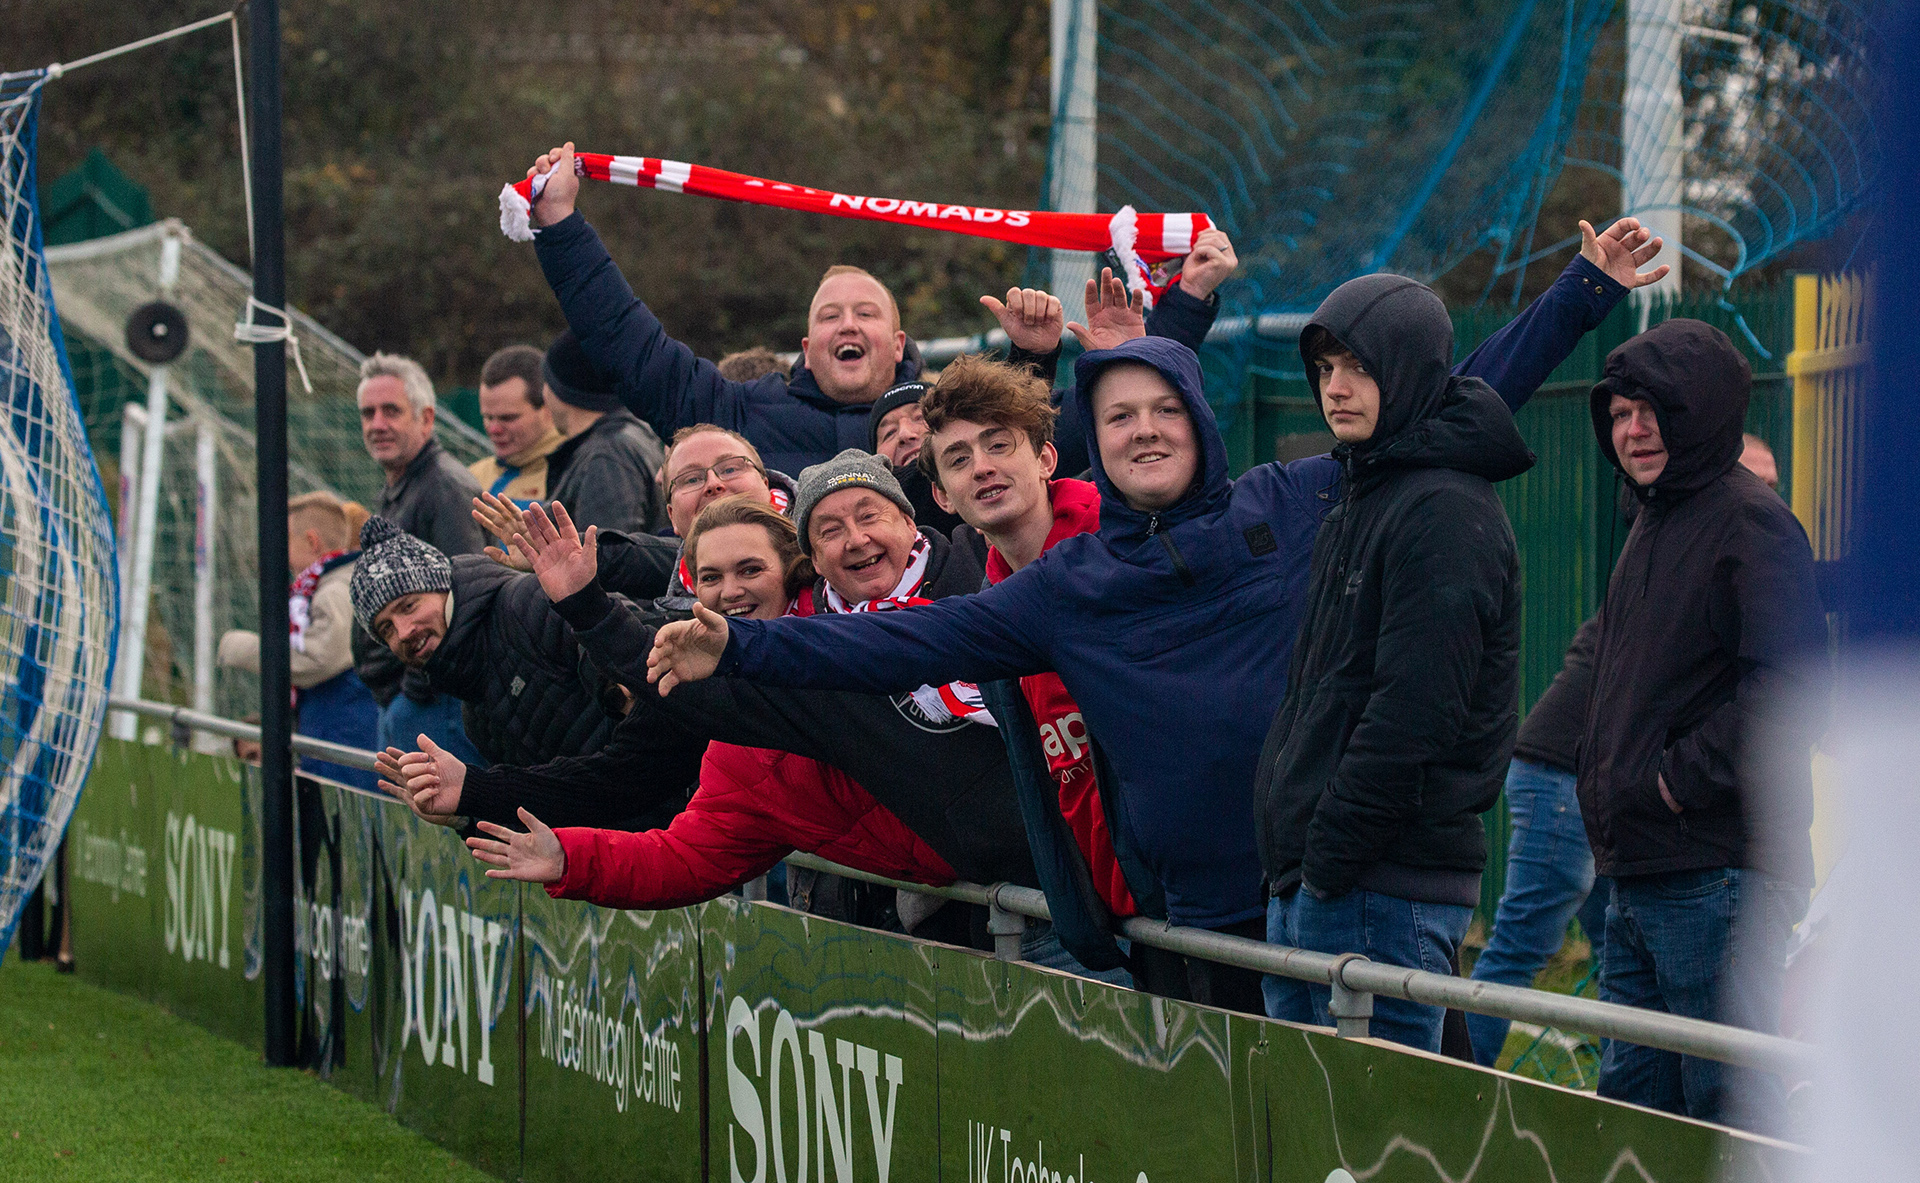 The great away support from Deeside | Photo: Tom Houghton